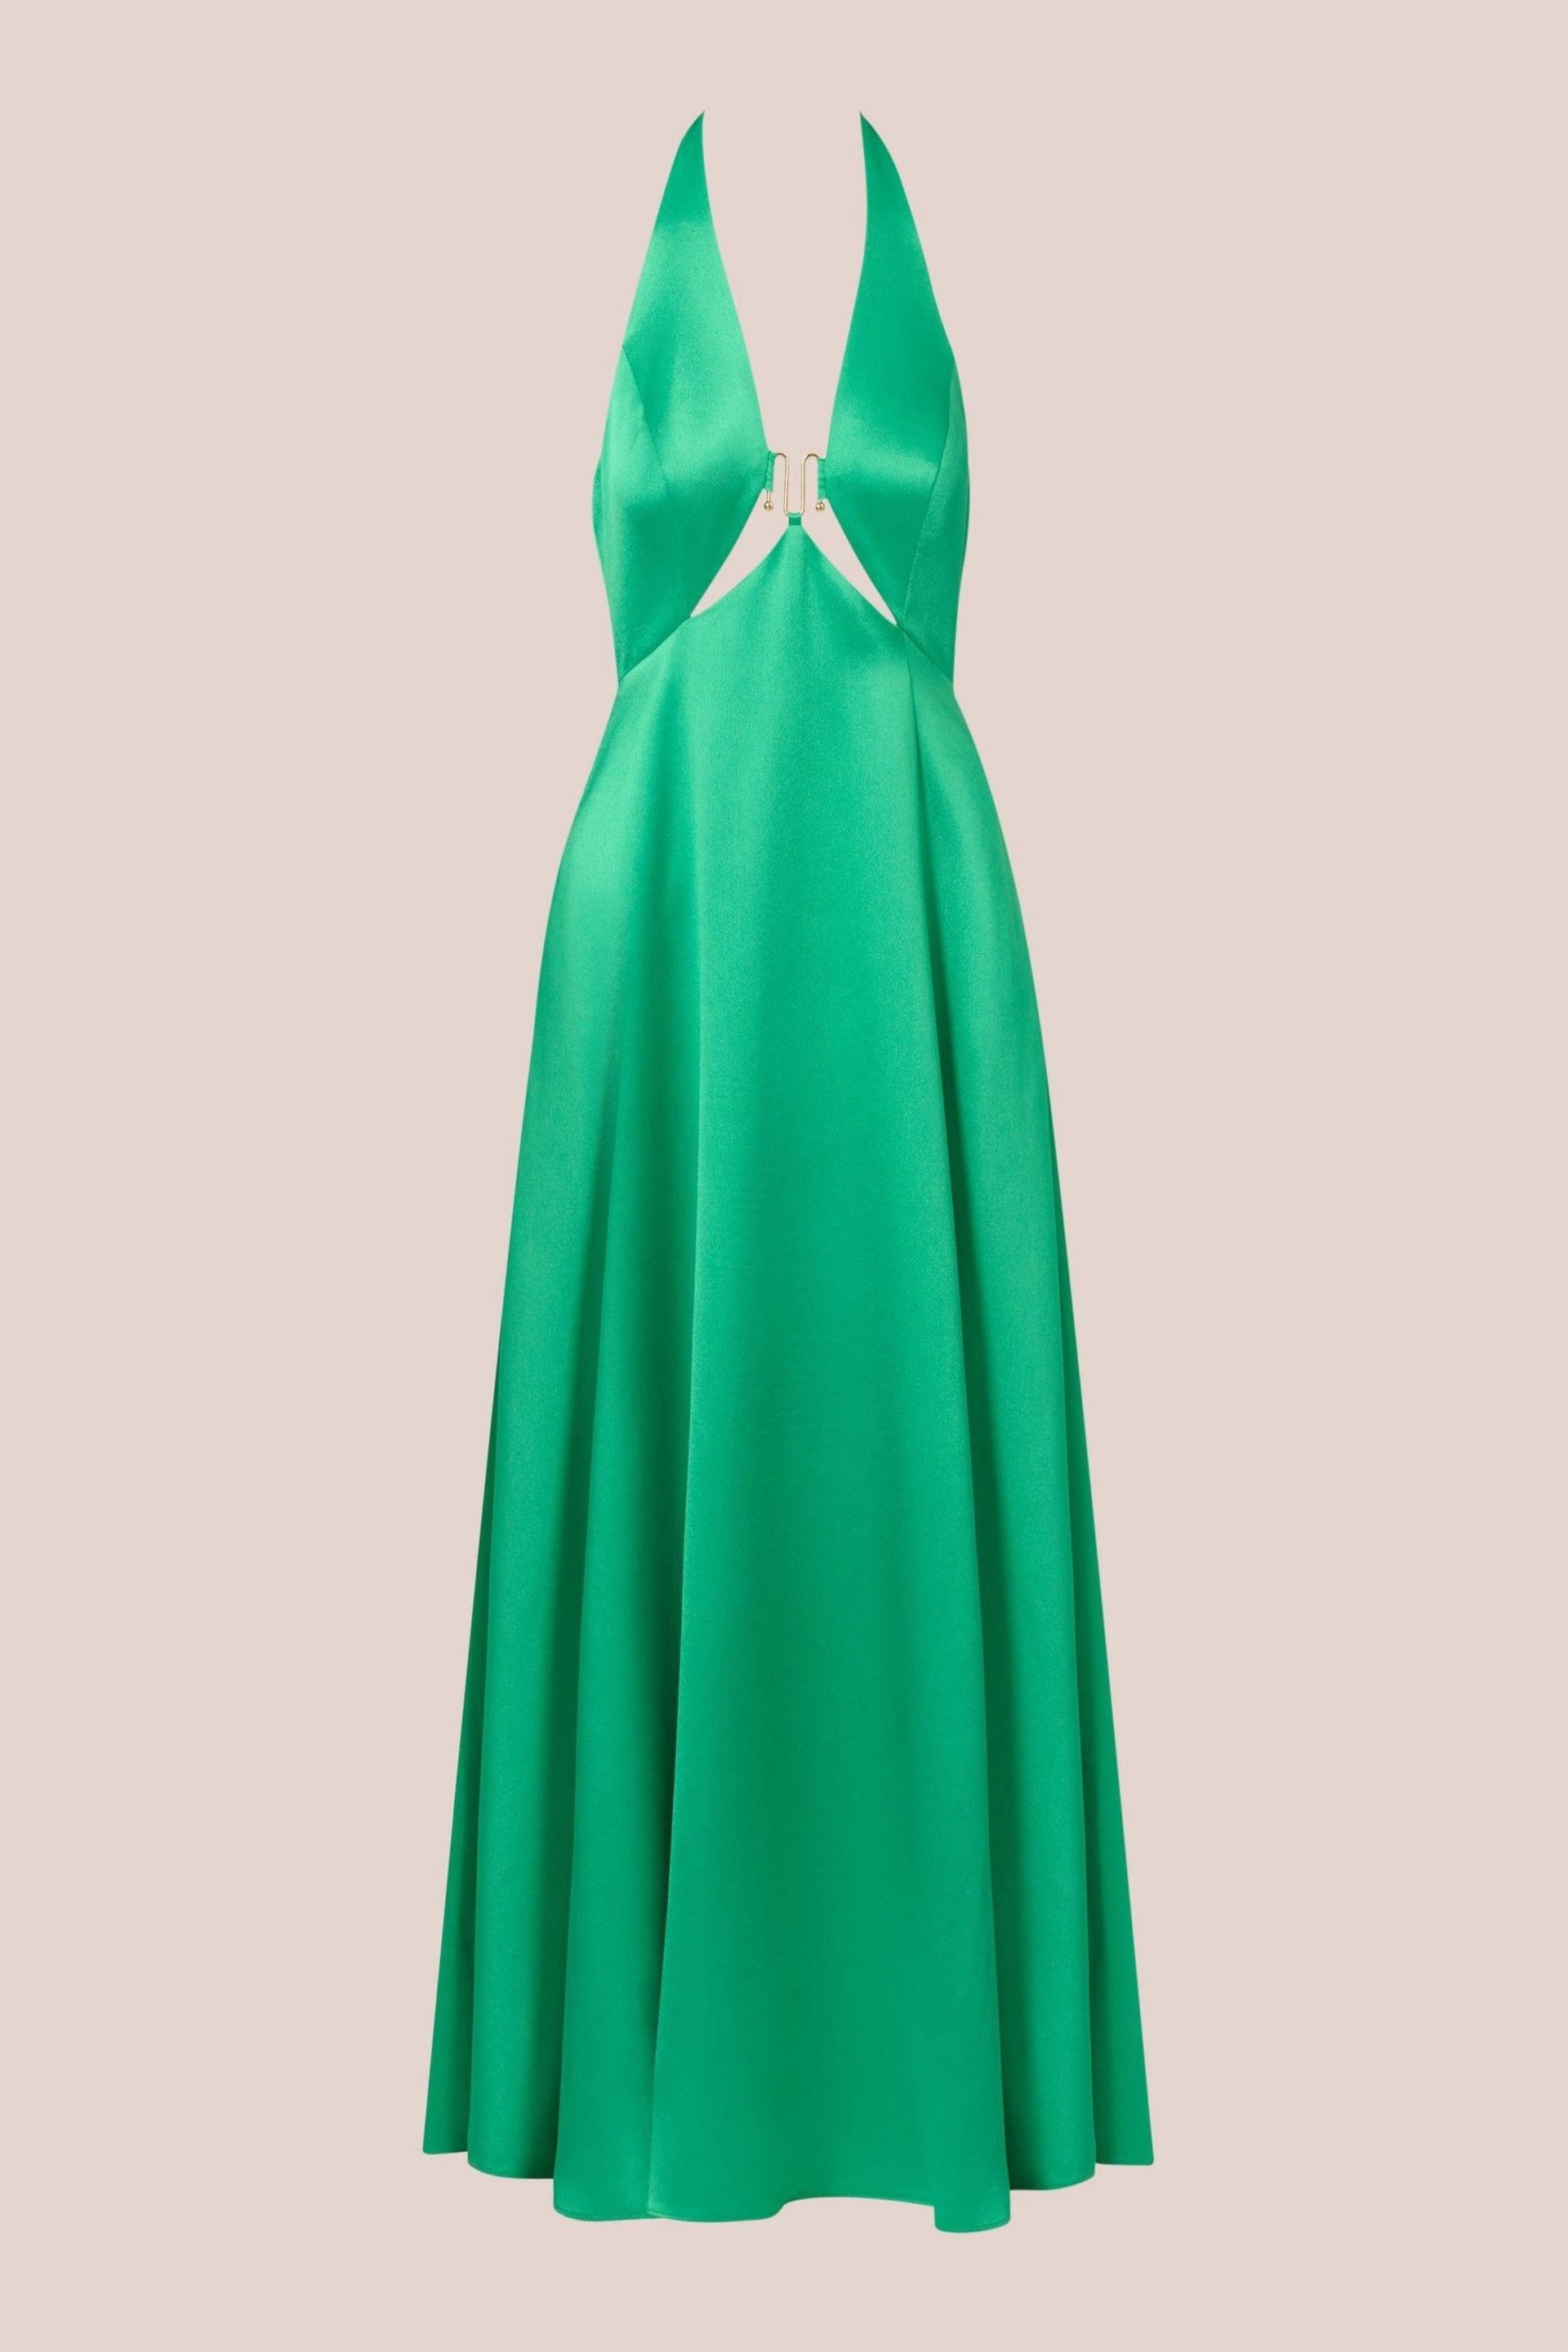 Adrianna Papell Green Liquid Satin A-Line Gown - Image 6 of 7